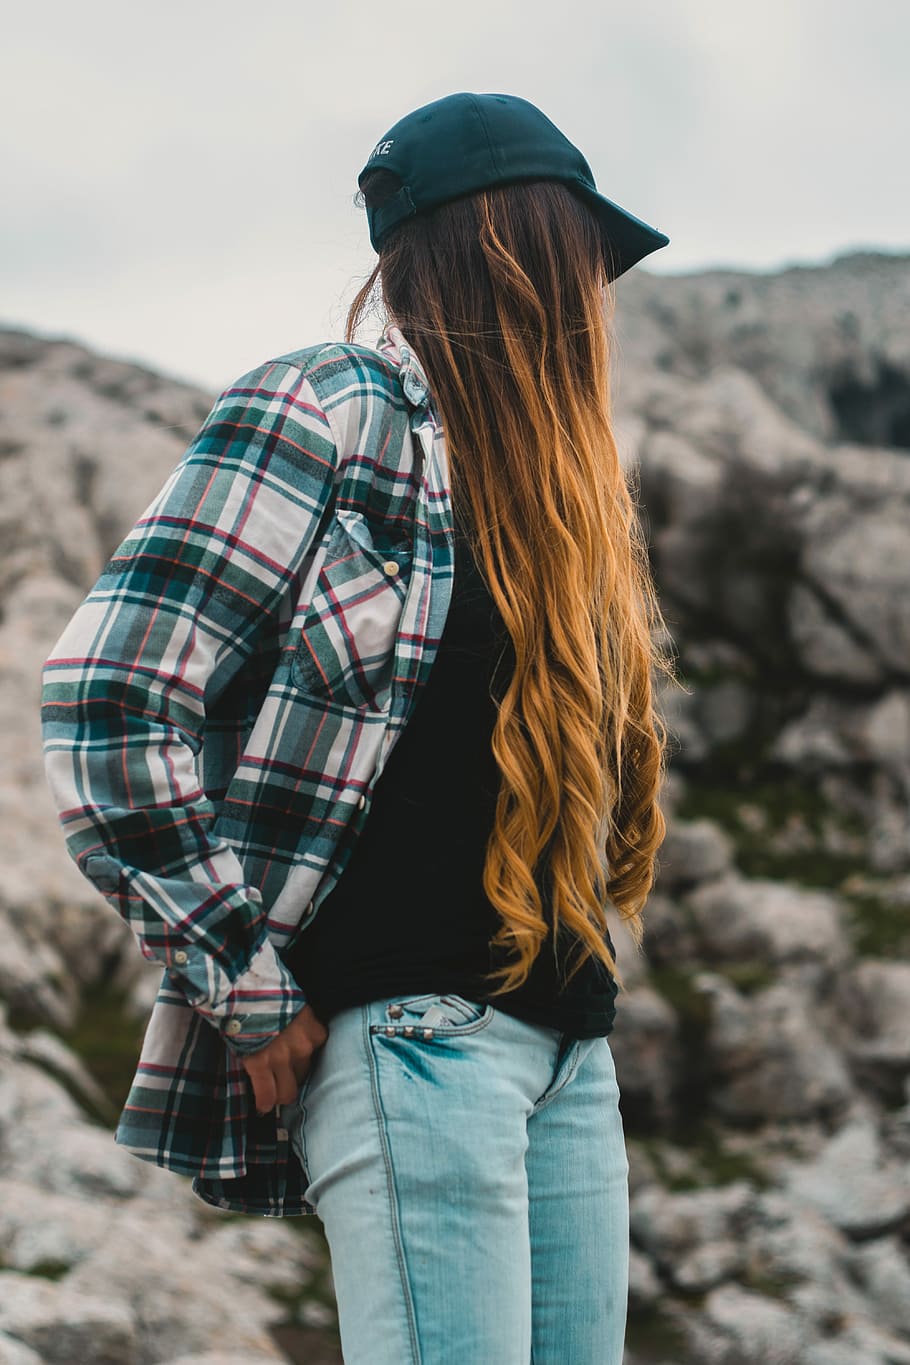 women's white, green, and black plaid dress shirt wearing green cap, selective focus of woman standing near rock formation during daytime, HD wallpaper